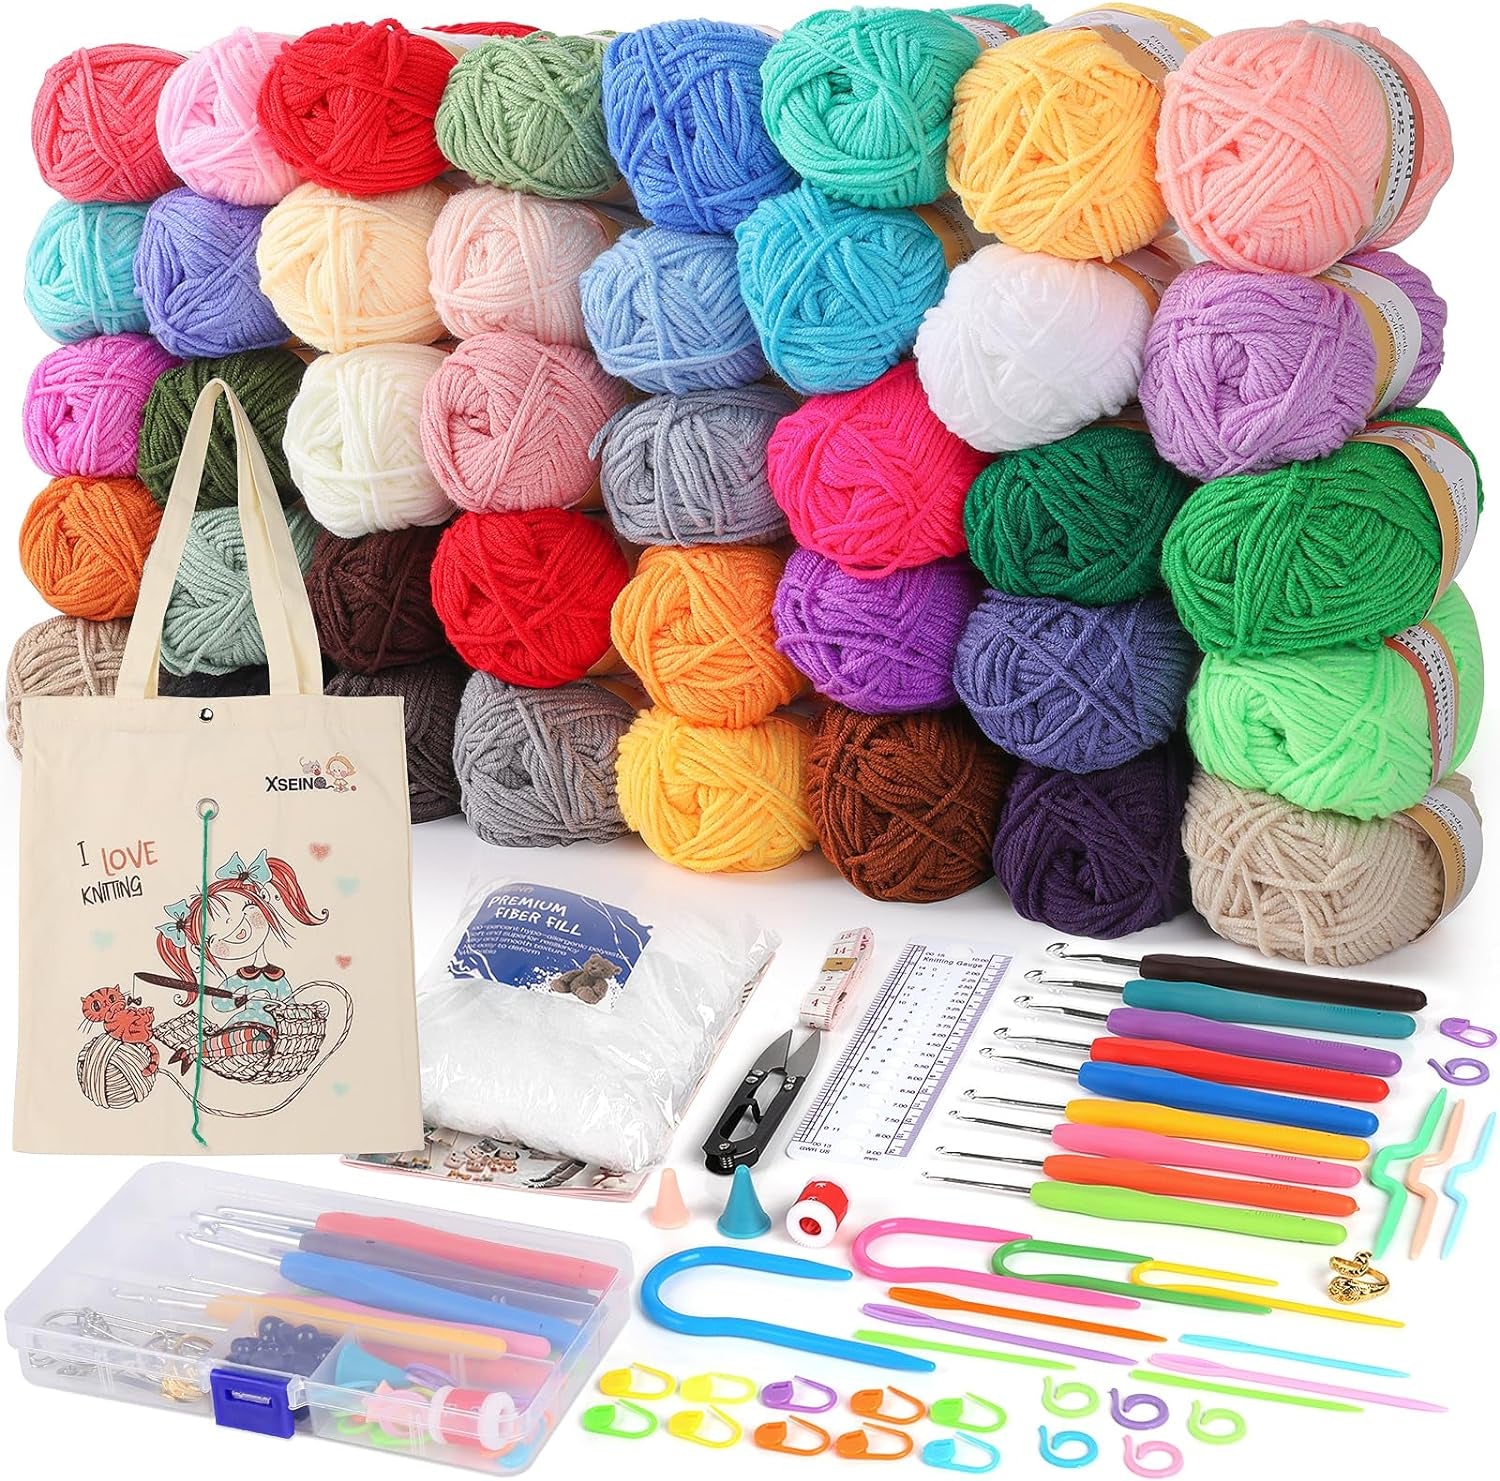 Crochet Kit with Step-By-Step Video Tutorials，Premium Bundle Includes 12 Roll X50Yard Acrylic Yarn Balls, 12 Crochet Hooks, Crochet Bag and All Accessories Kit, Crochet Kit for Beginners